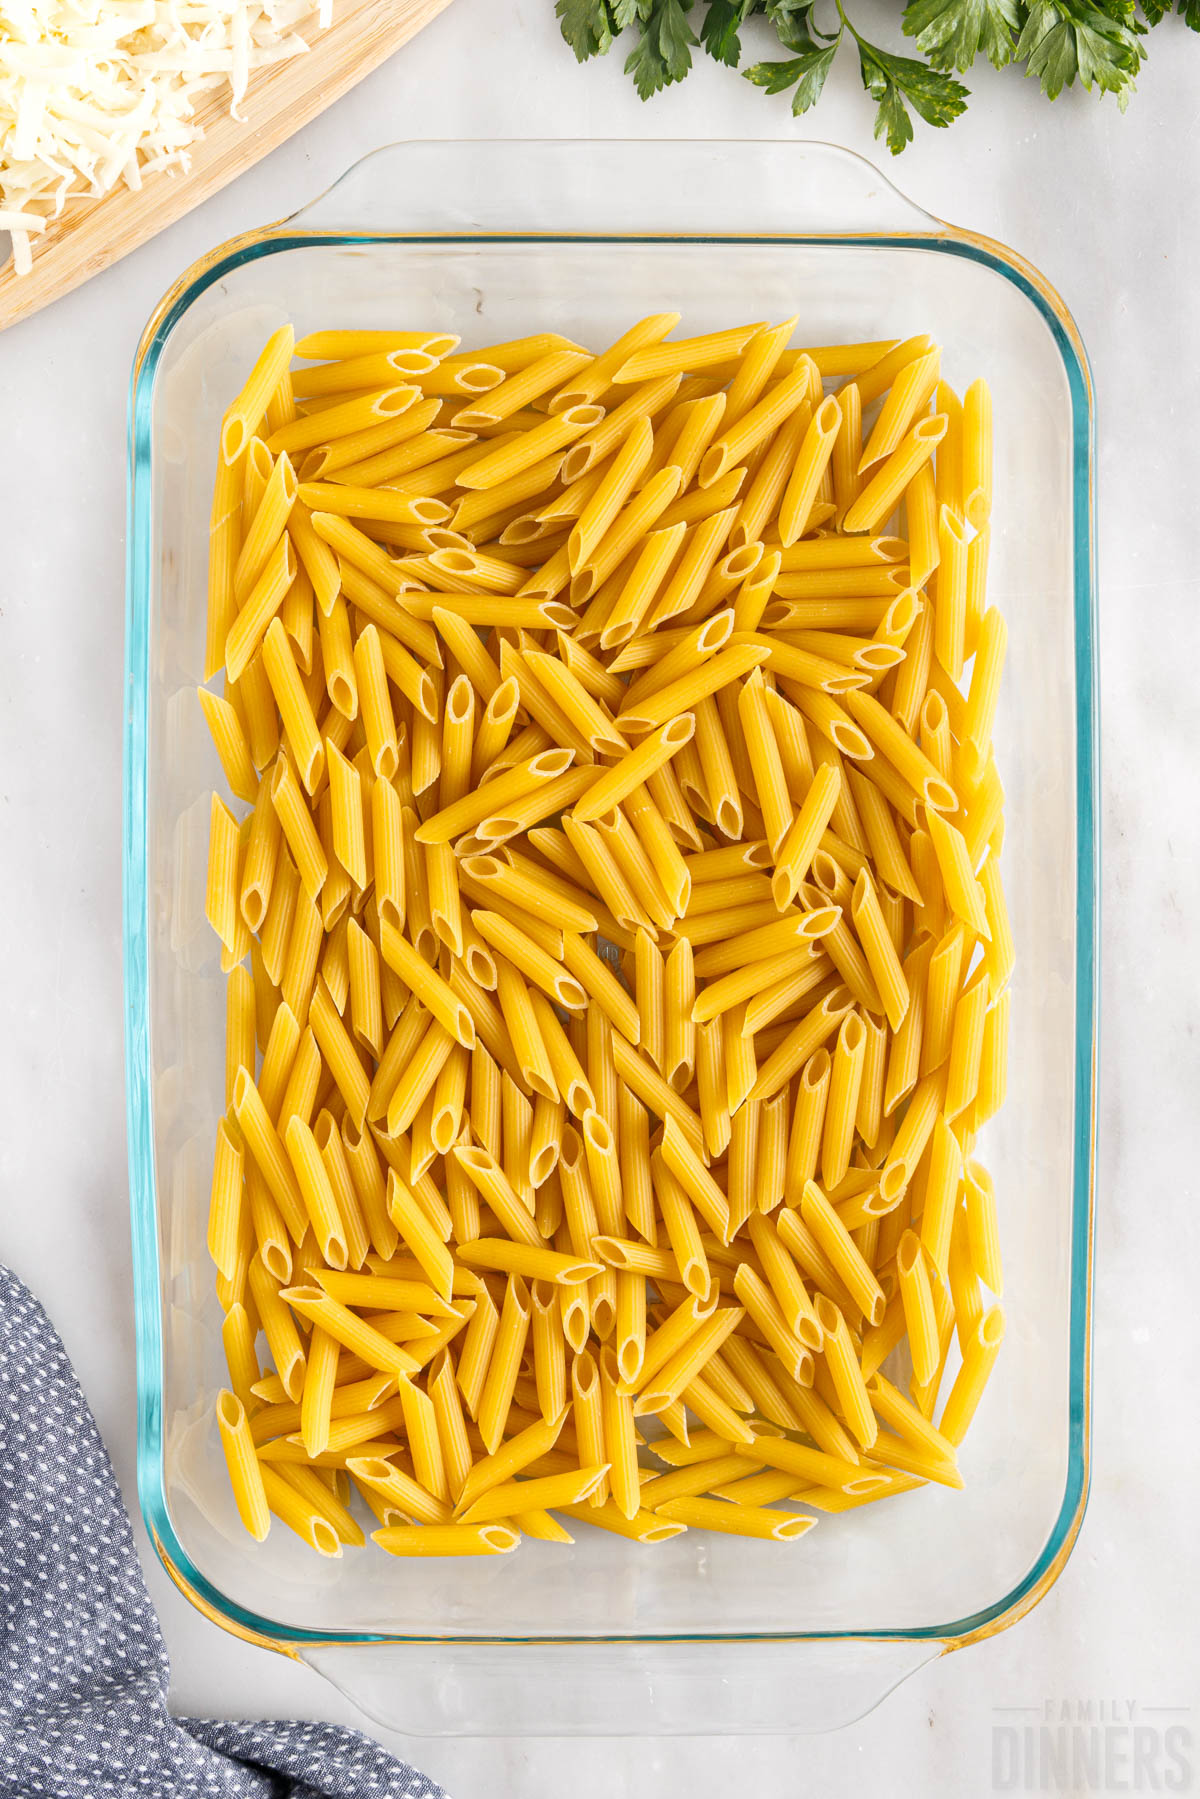 uncooked pasta in a baking dish